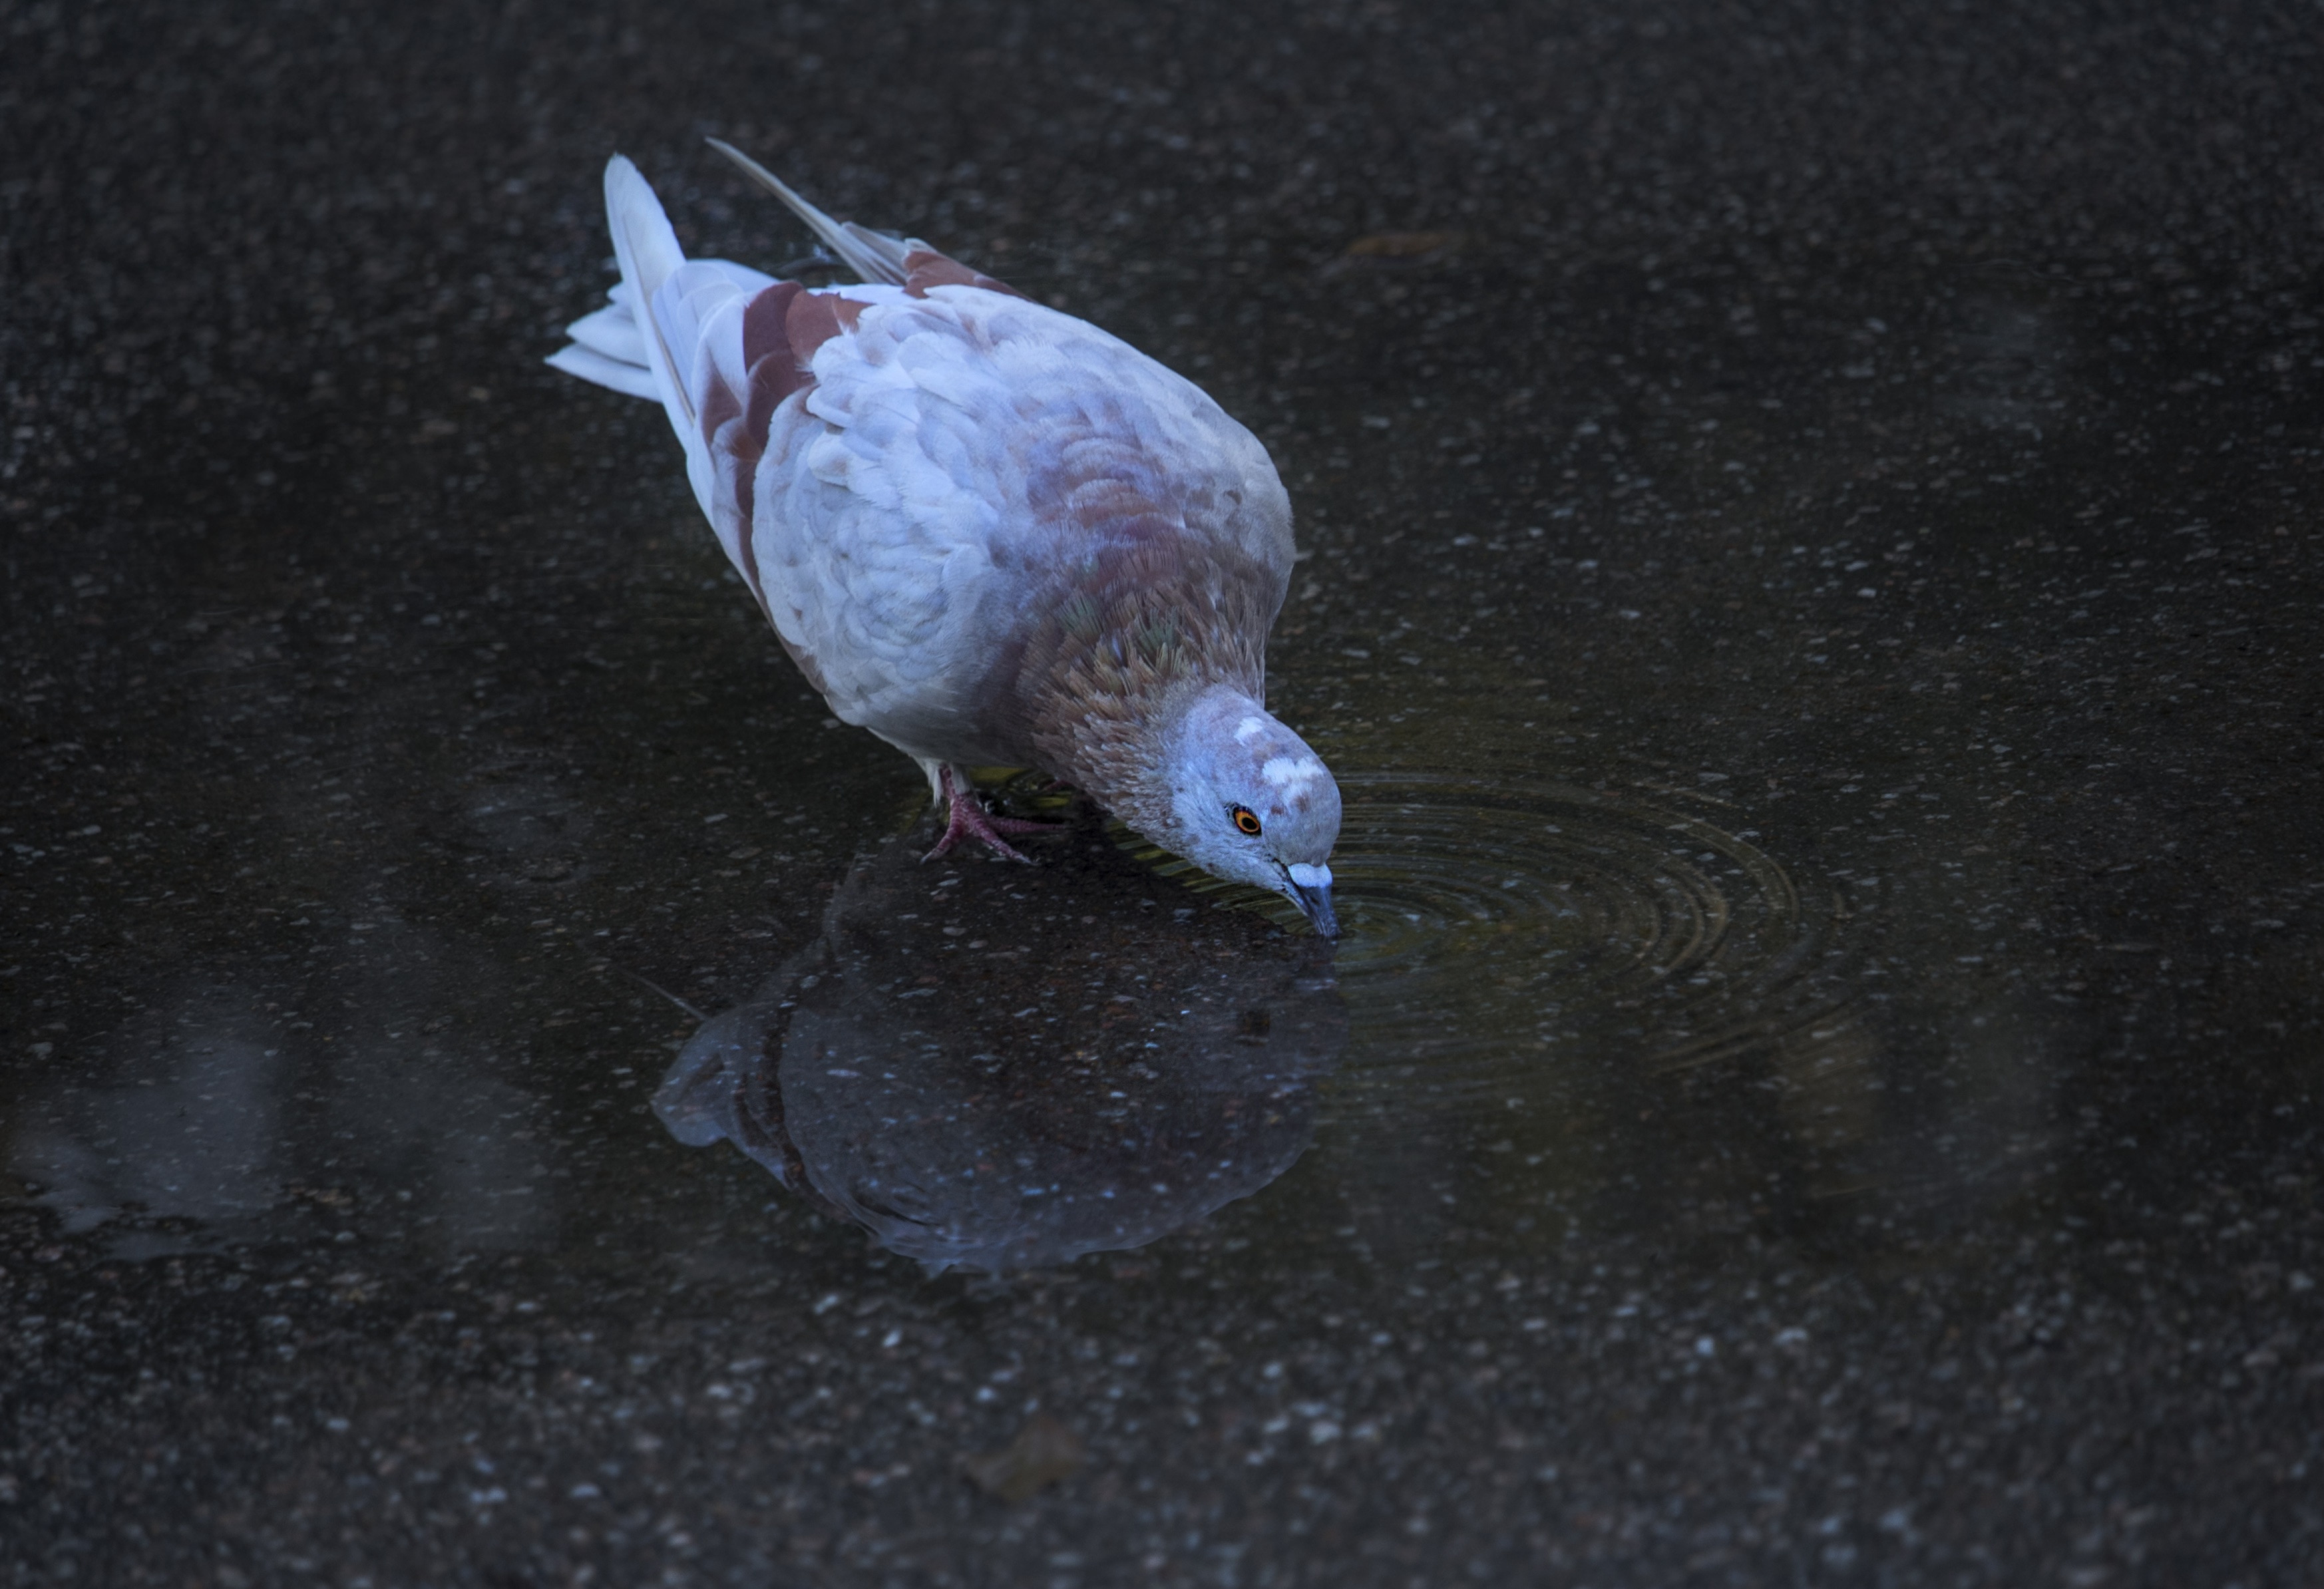 white and brown pigeon